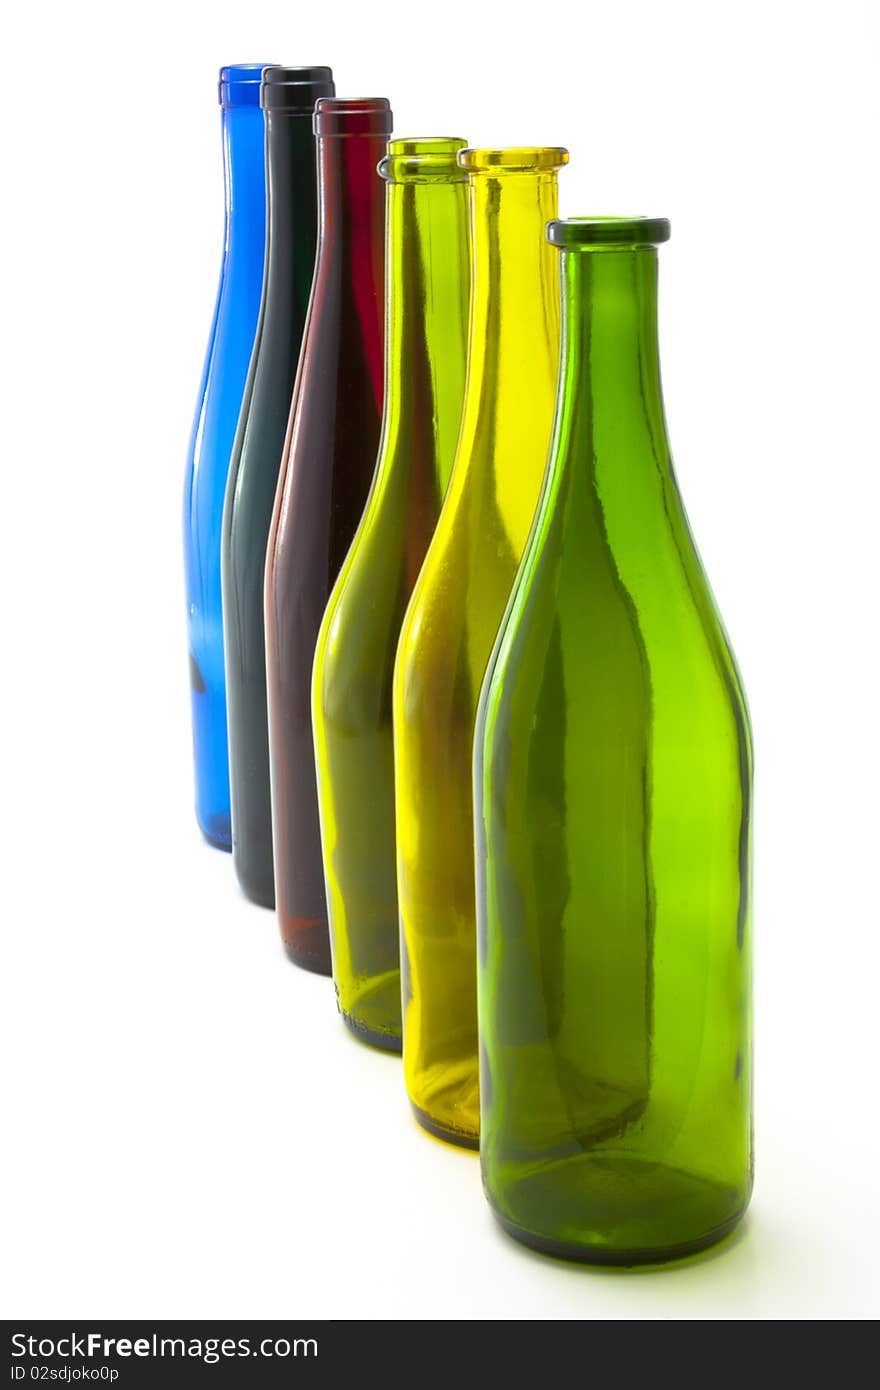 A collection of colorful glass wine bottles arranged in a line. A collection of colorful glass wine bottles arranged in a line.